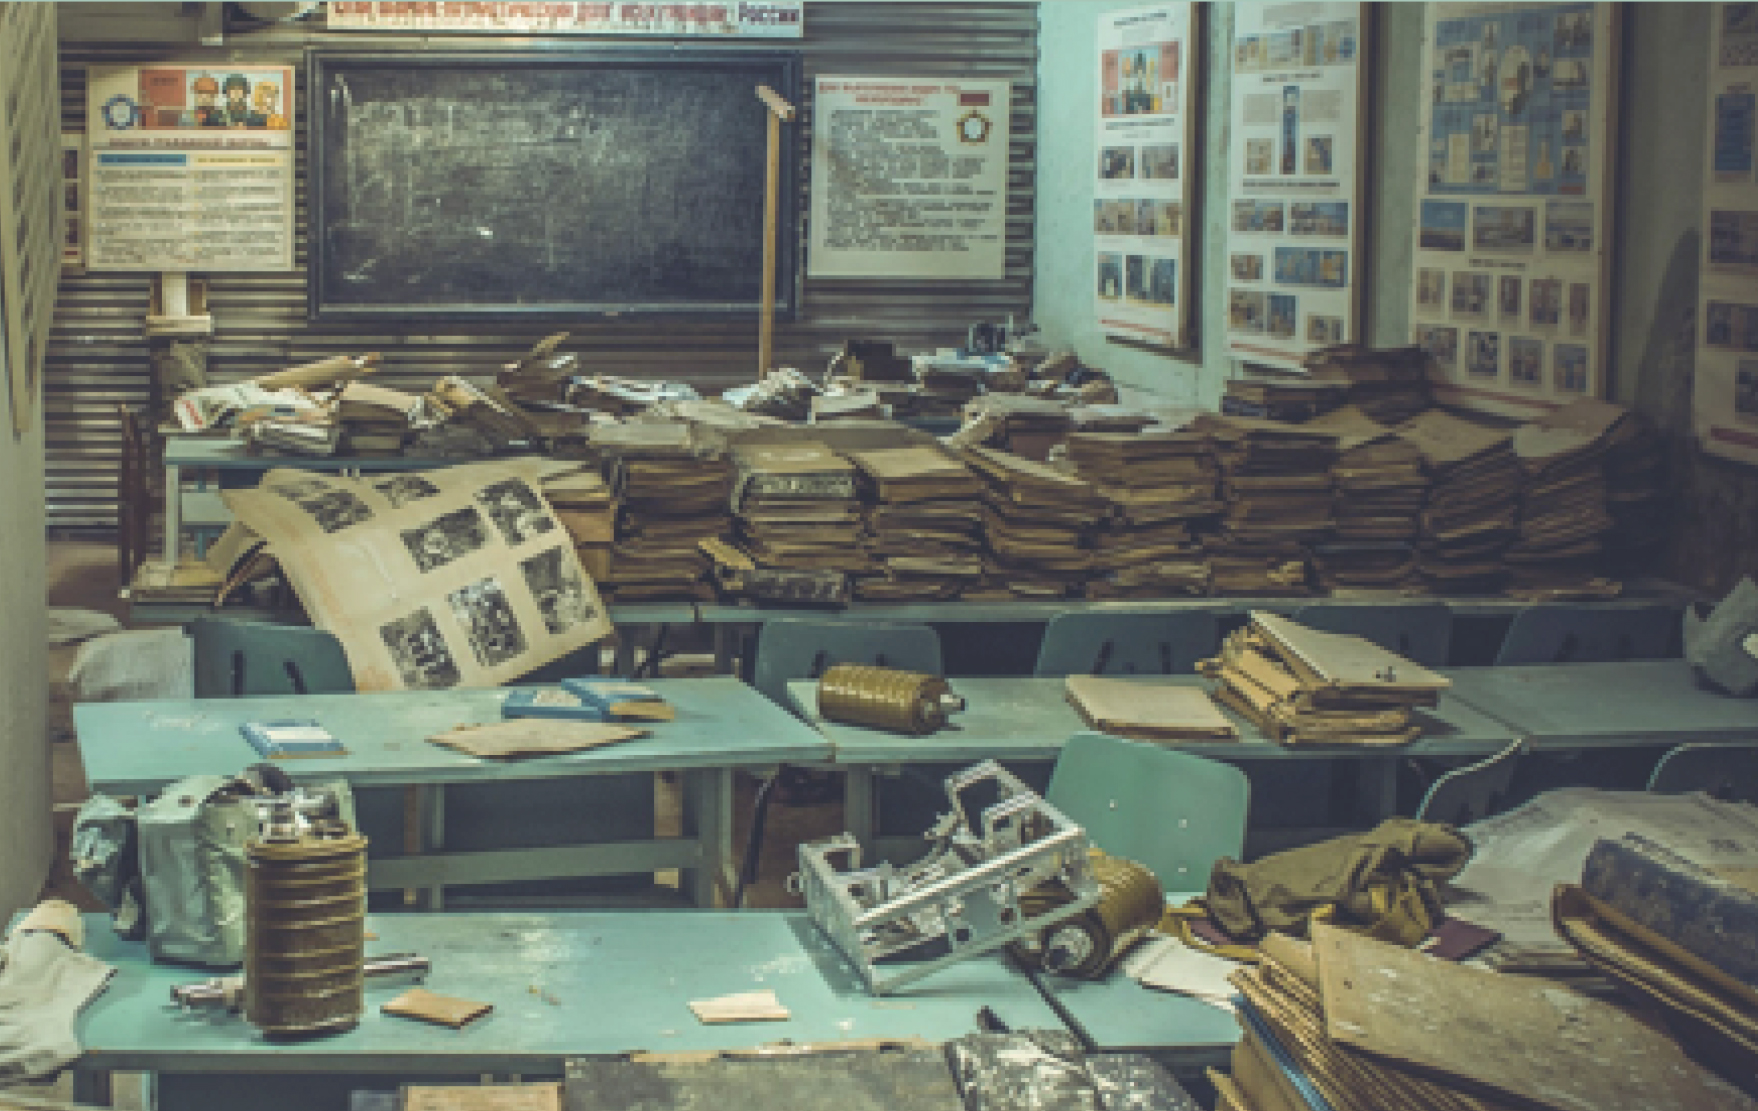 A picture of a cluttered classroom with a blackboard at the front, green tables and desks piled with books and papers, and posters on the walls.